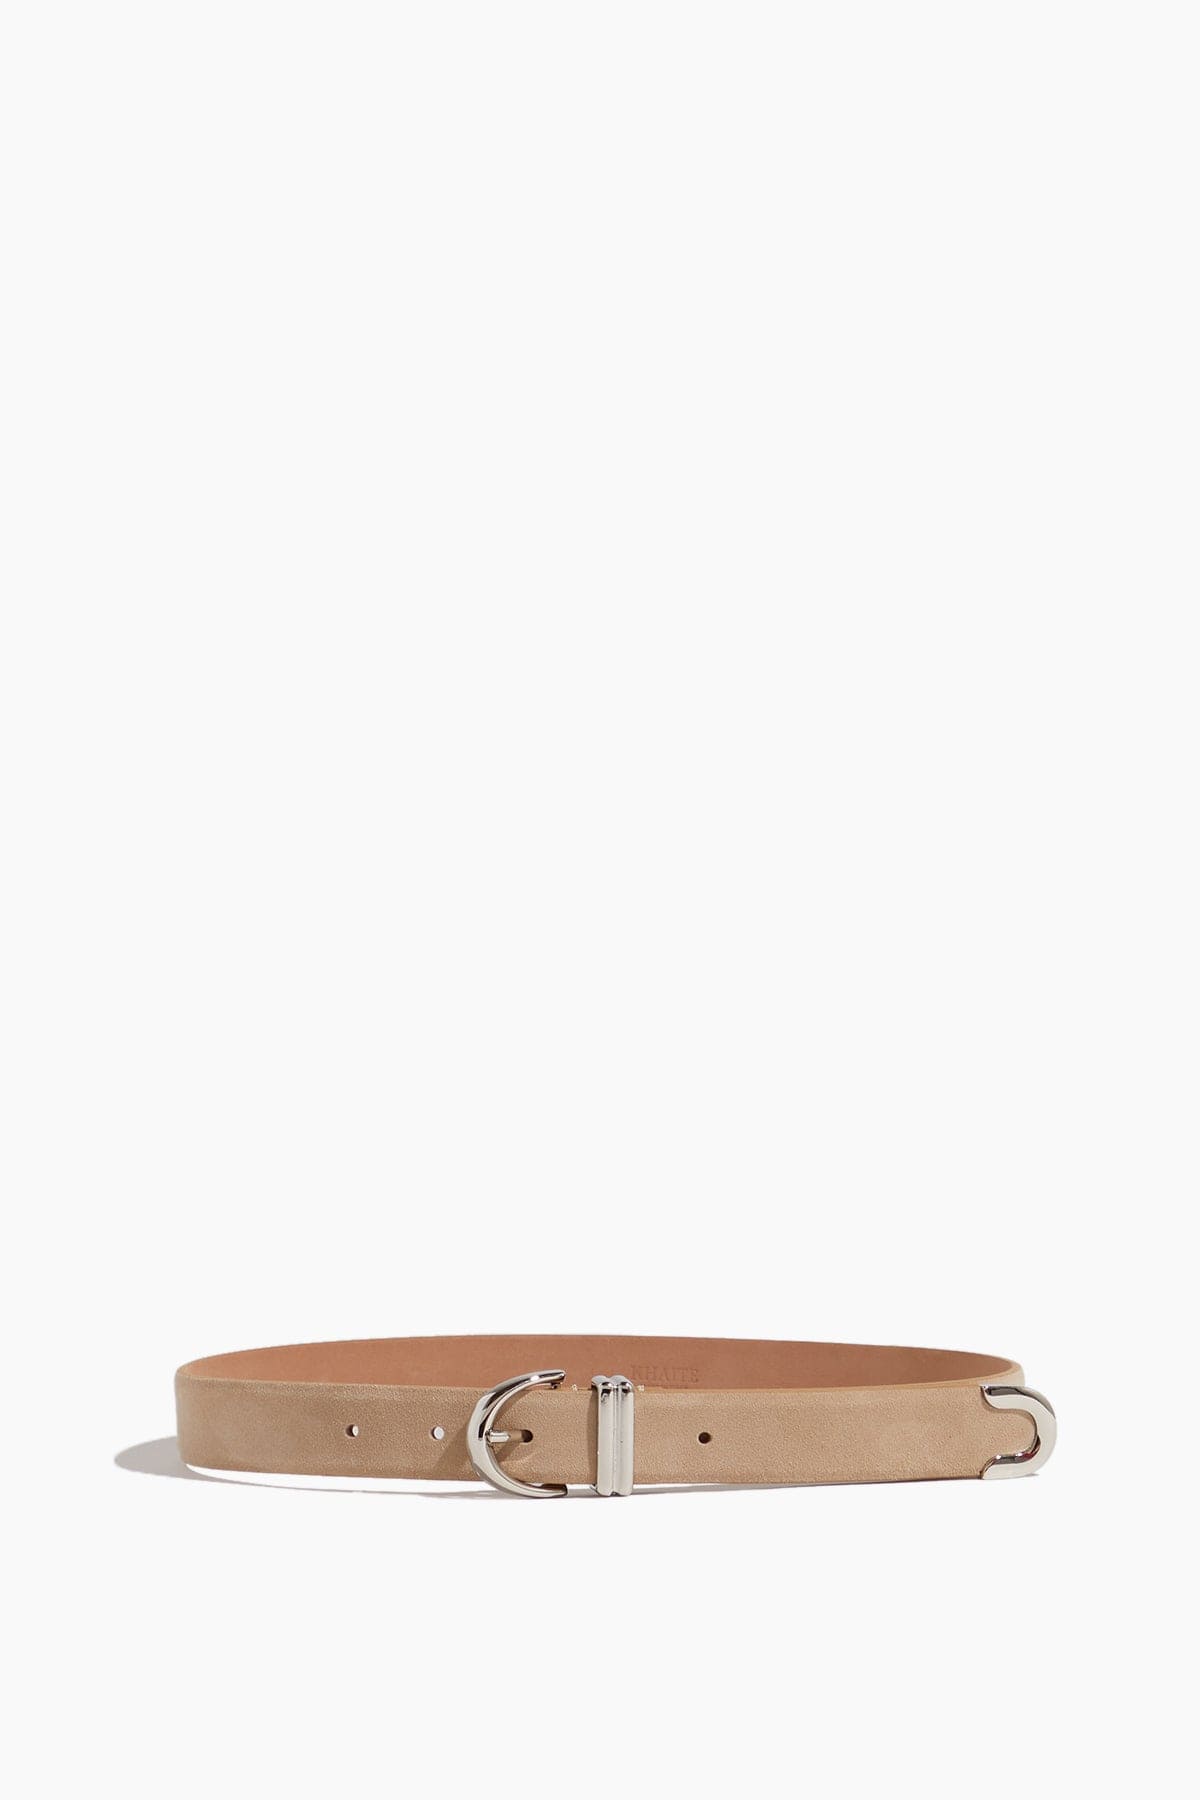 Khaite Bambi Skinny Belt with Silver Hardware in Nude - Neutrals - Size: 85cm